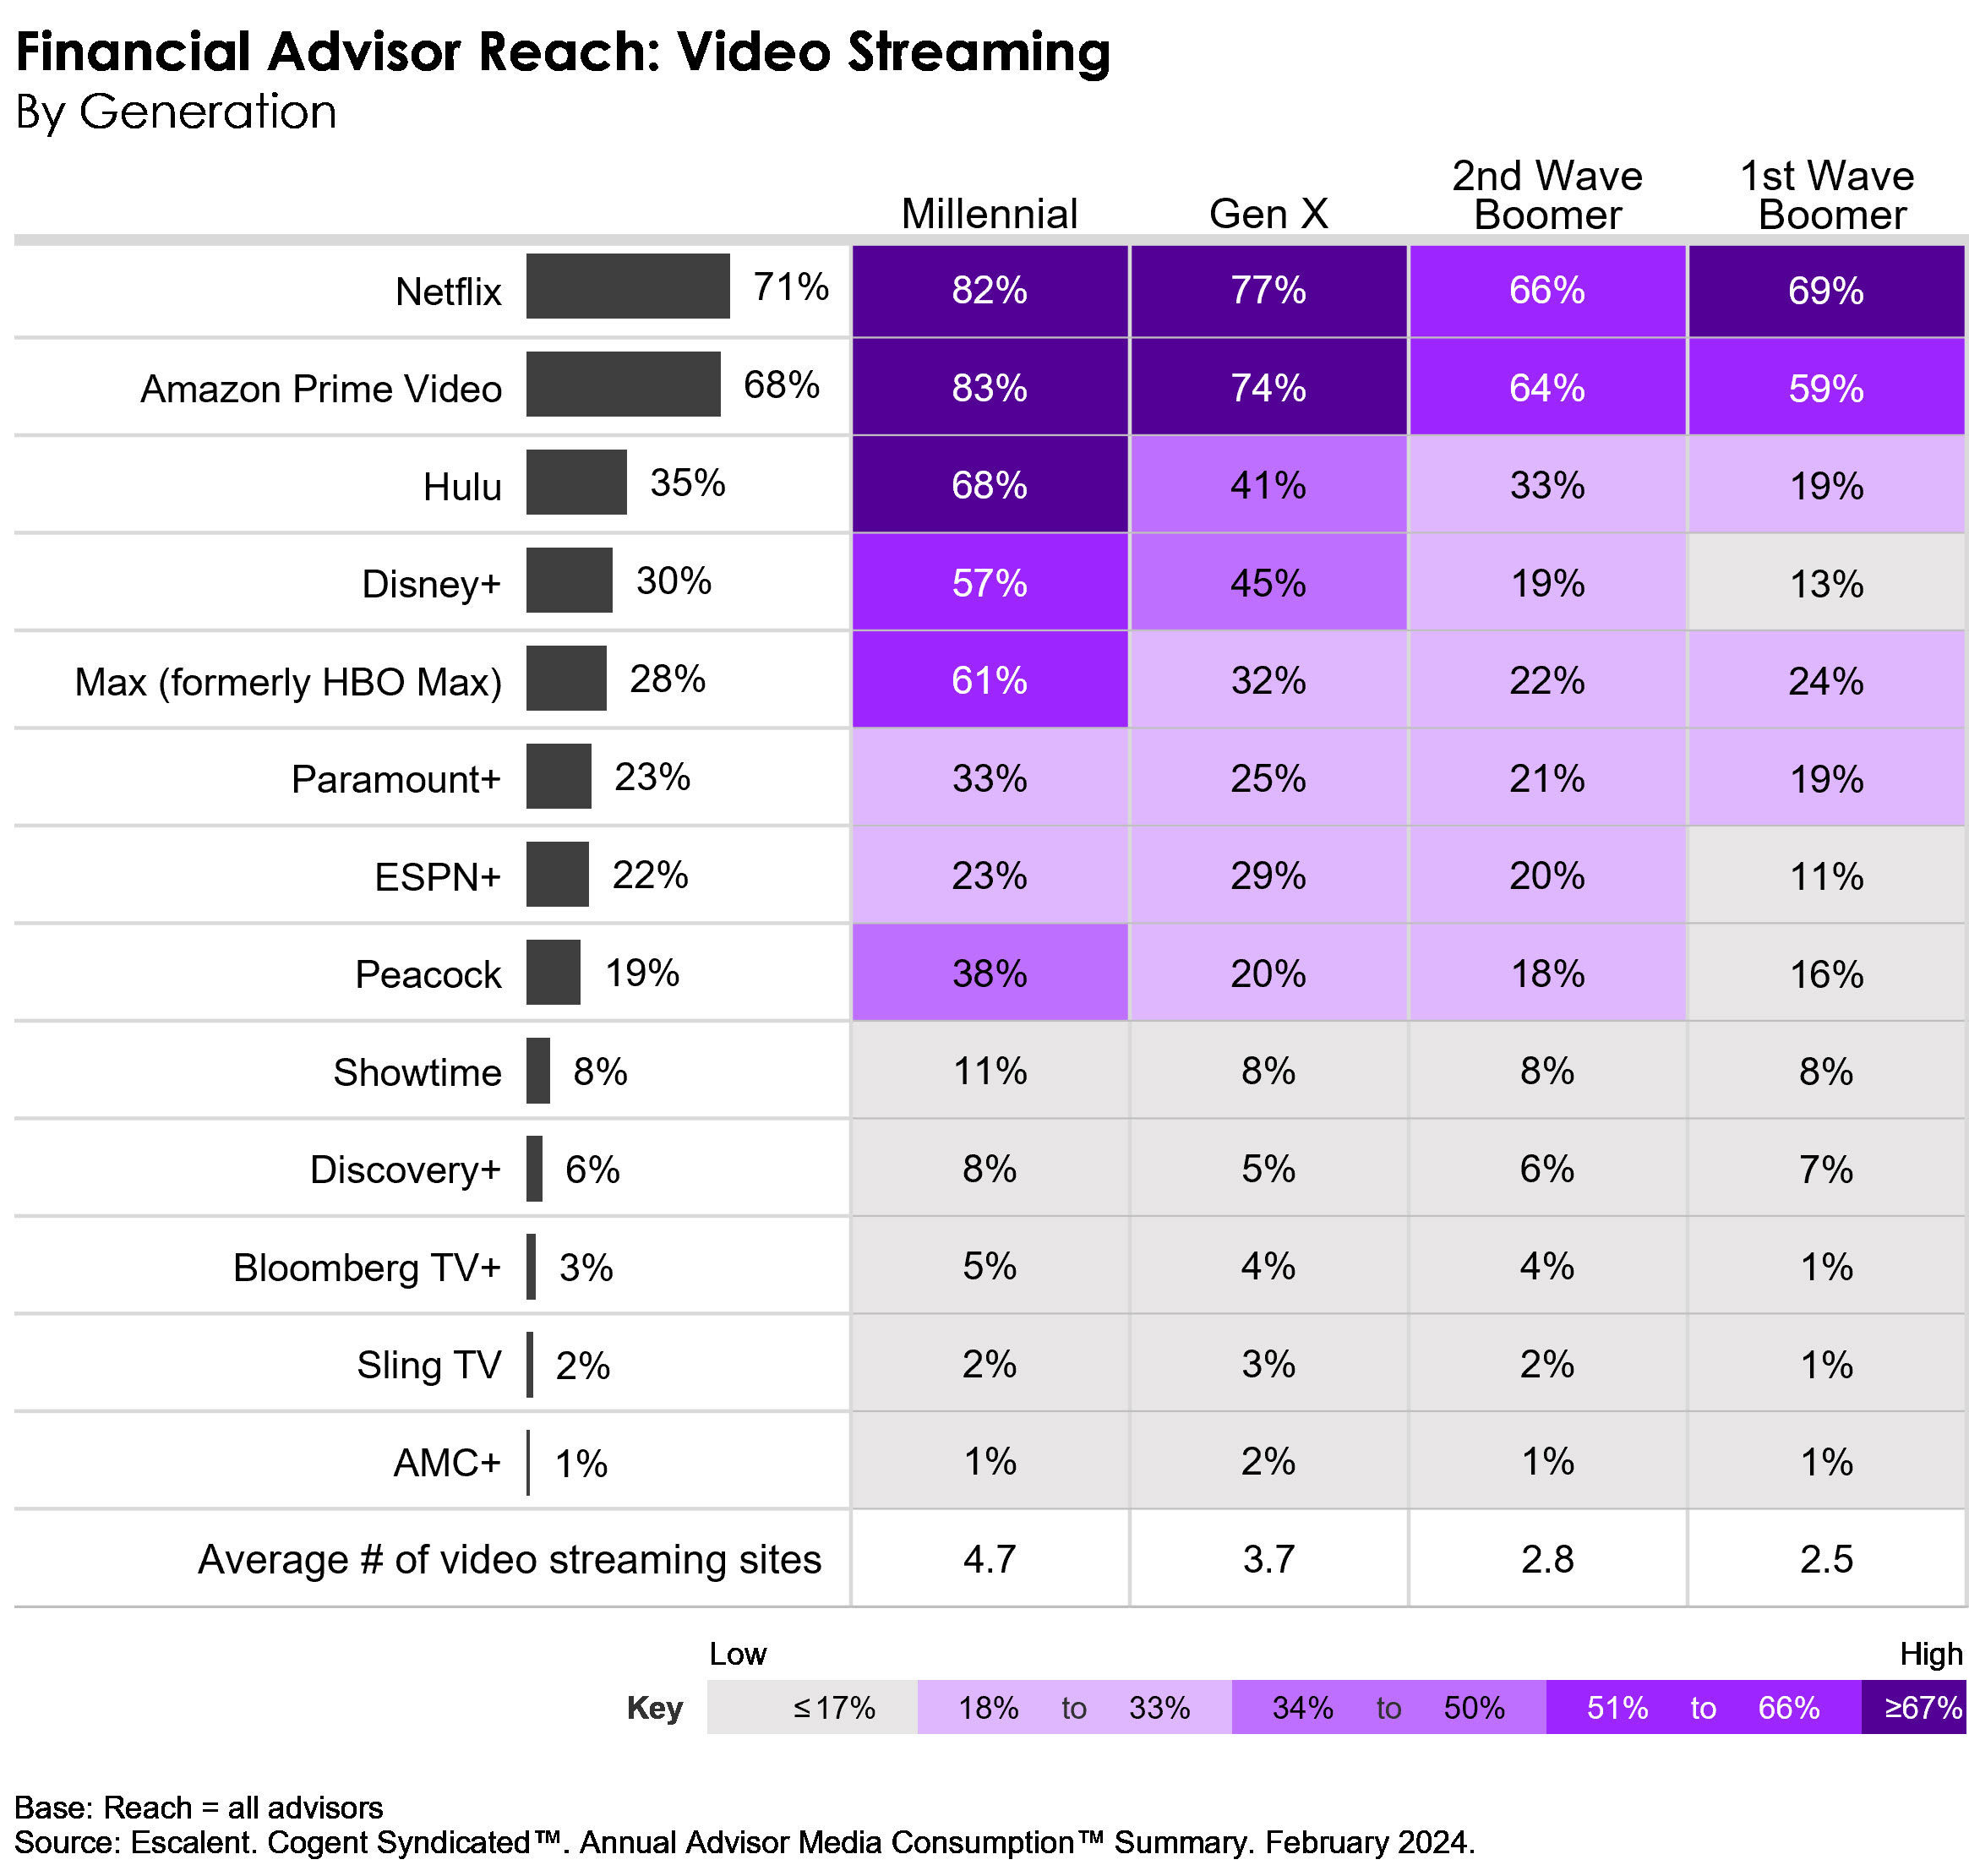 A table depicting the reach of video streaming services among financial advisors by generation.